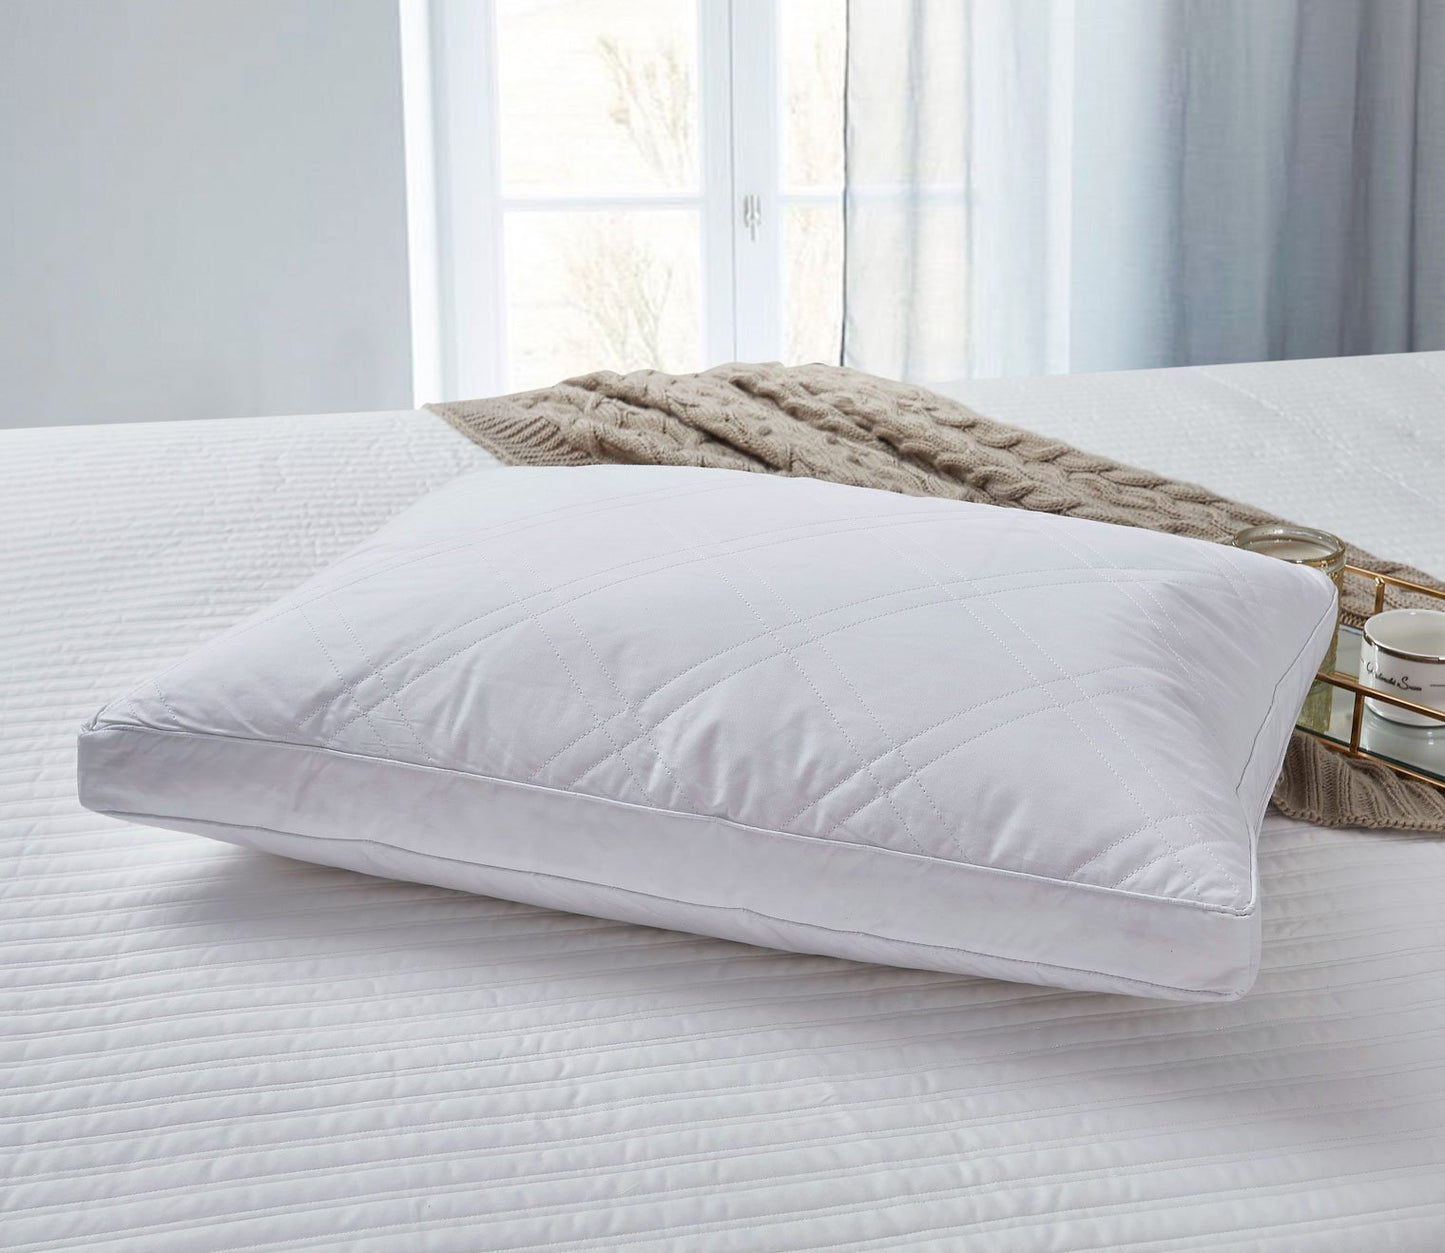 Quilted White Goose Feather and Down Pillow 2-Pack by Blue Ridge Home